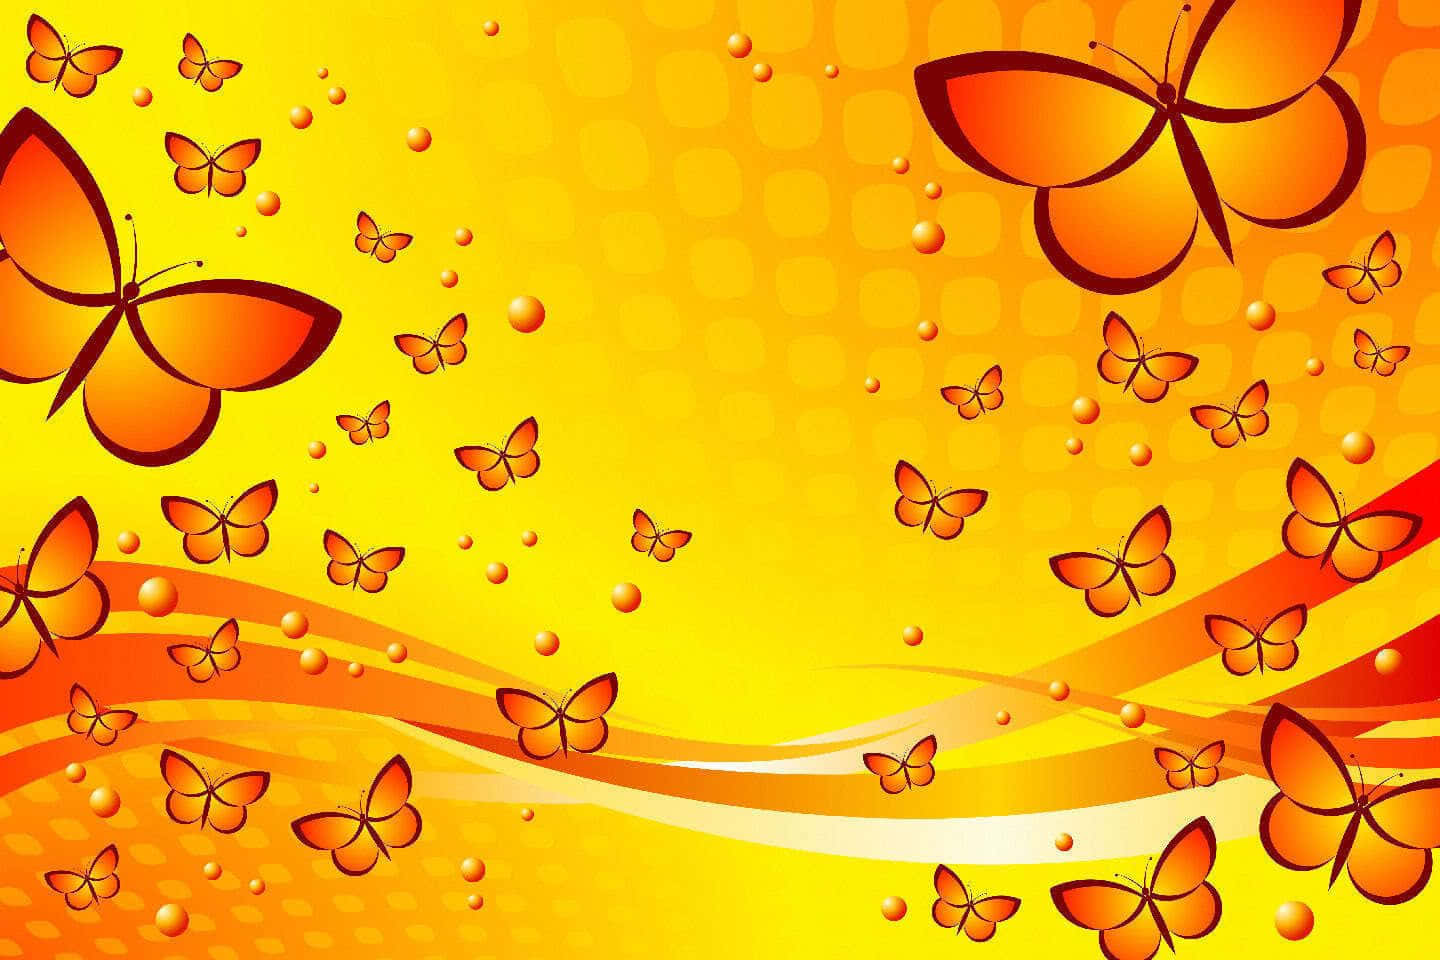 Enjoy the beauty of nature - a group of vibrant yellow butterflies. Wallpaper